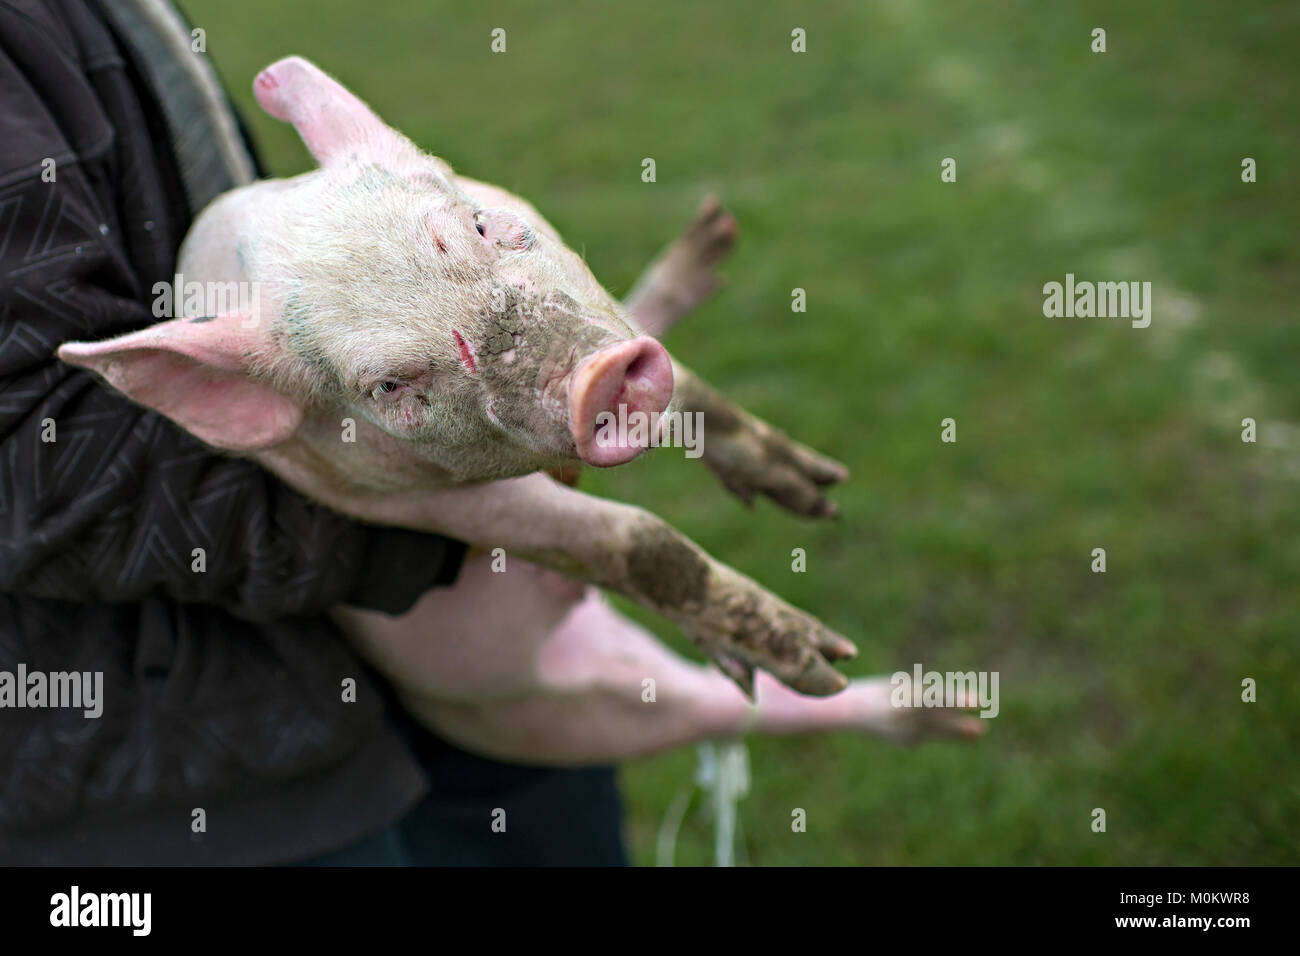 A farmer carries little pig to slaughter it Stock Photo